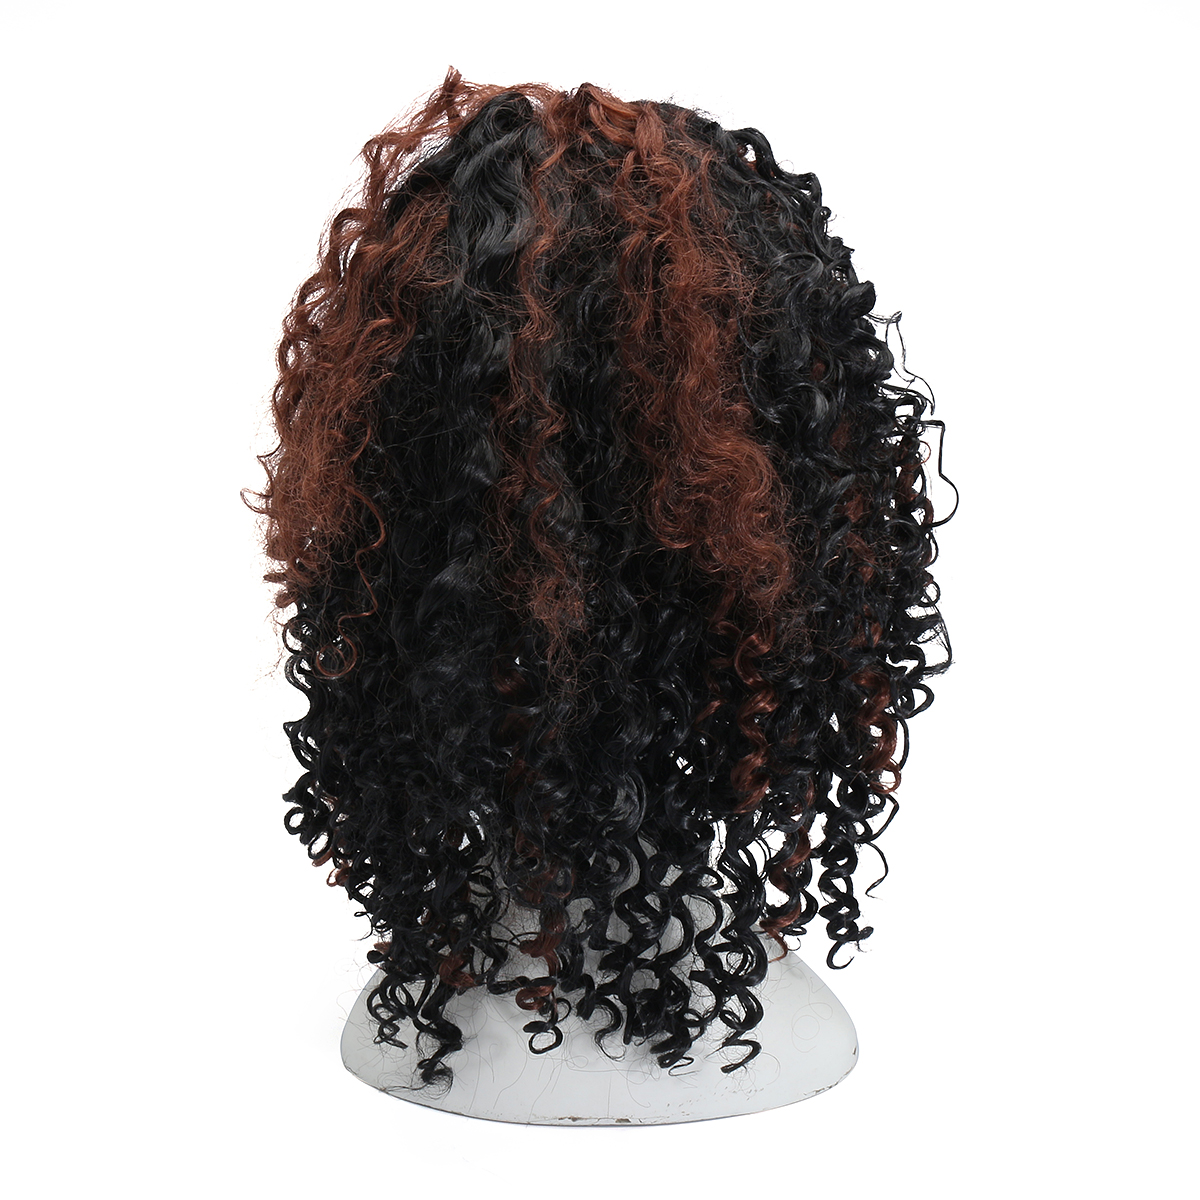 Brazilian-Black-Brown-Hair-Deep-Wavy-Curly-Lace-Front-Full-Wig-1230999-3